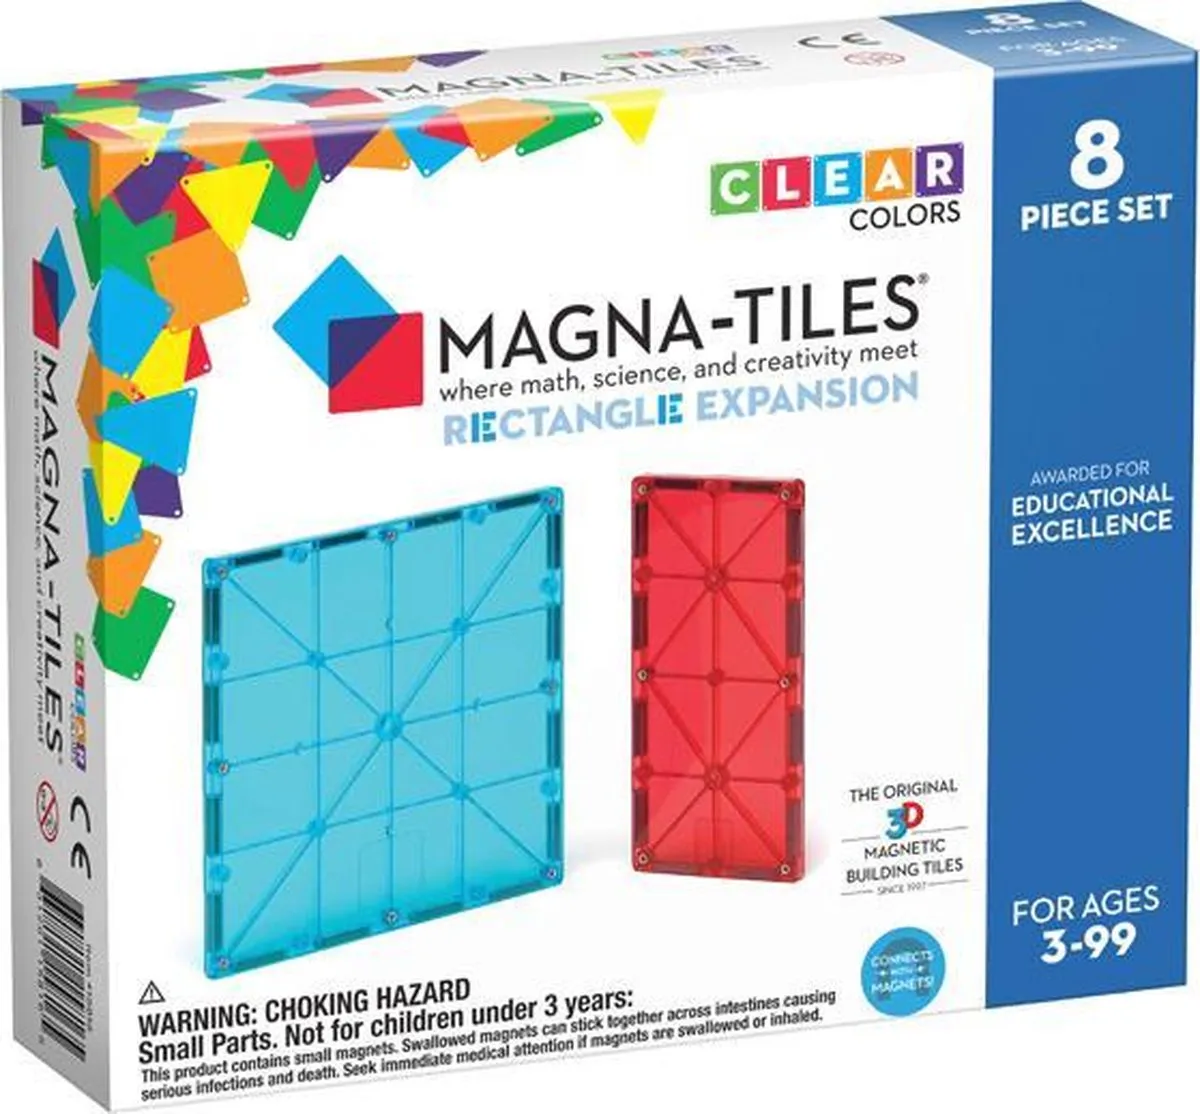 Magna-Tiles® Clear Colors Rectangles Expansion Set speelgoed